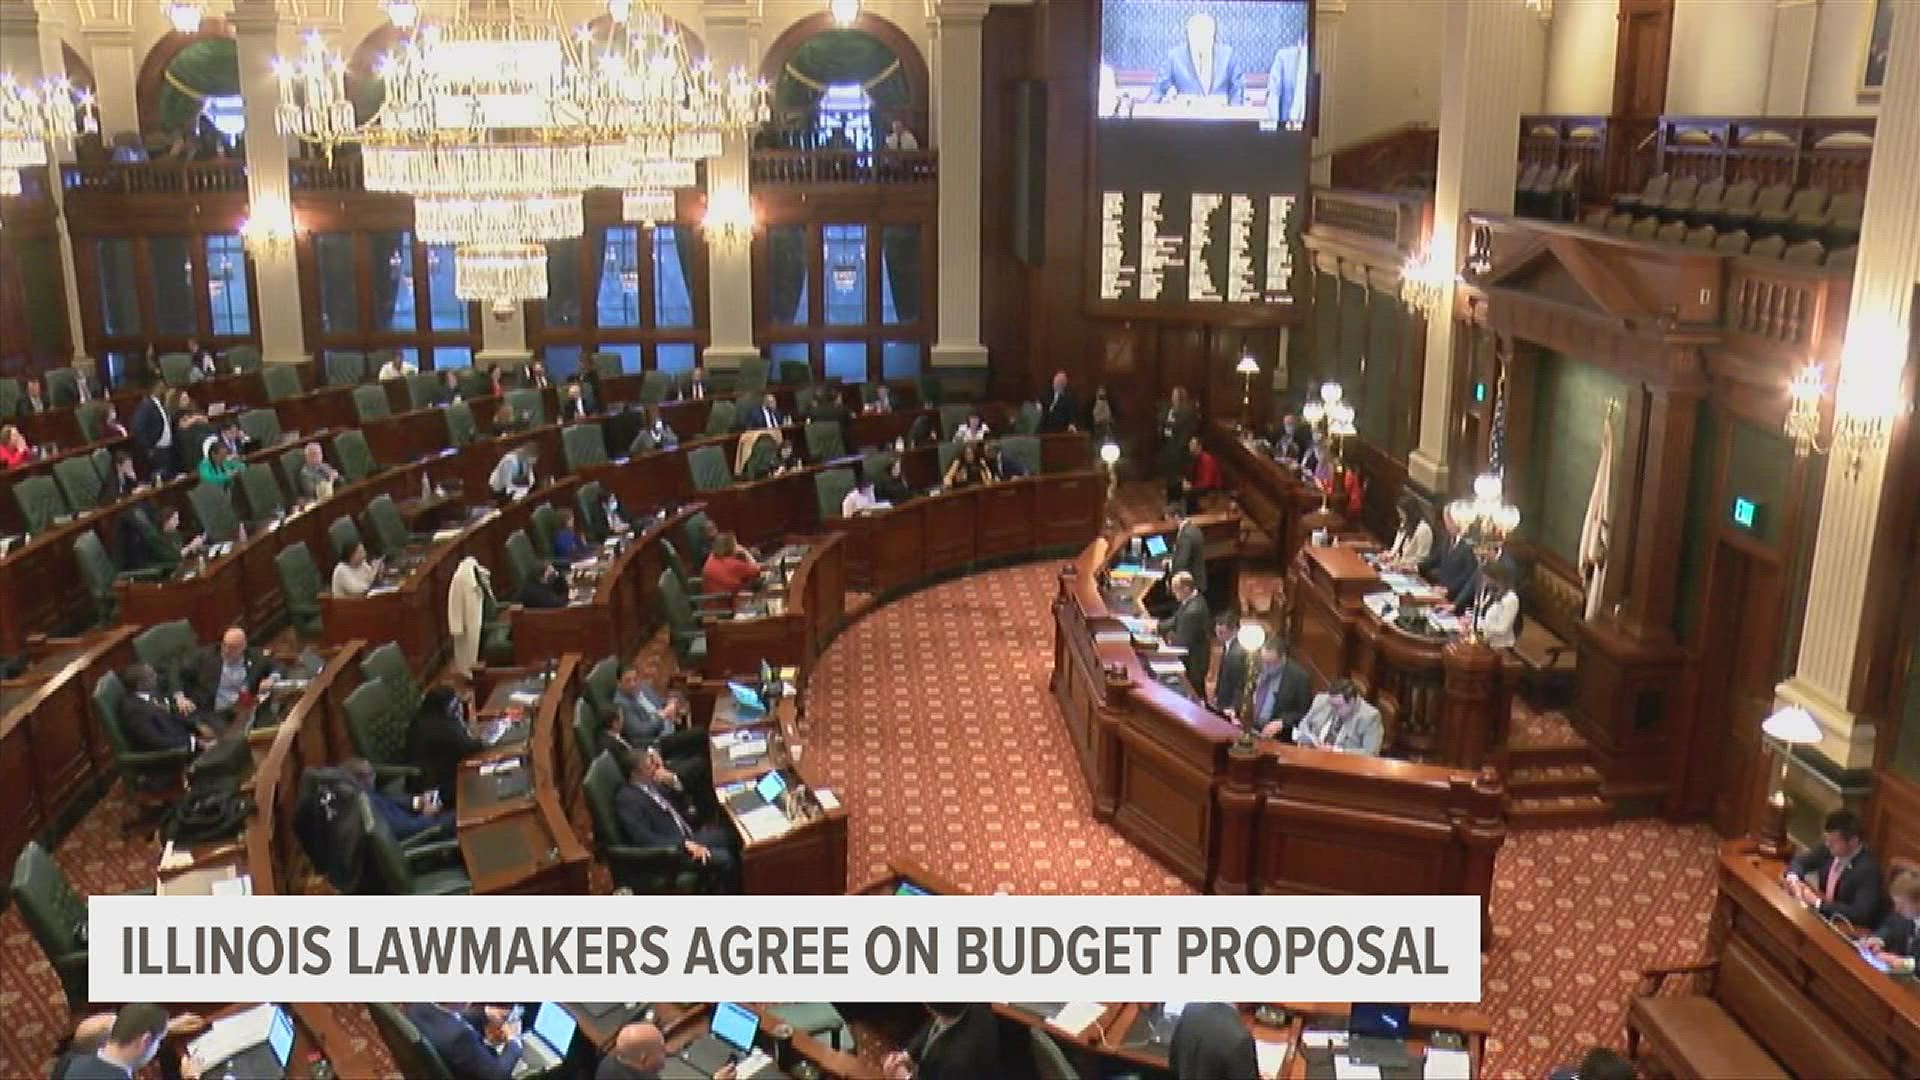 Democrats who control the state budget have reached an agreement on next year's spending plan. Gov. J.B. Pritzker announced the deal Thursday afternoon.